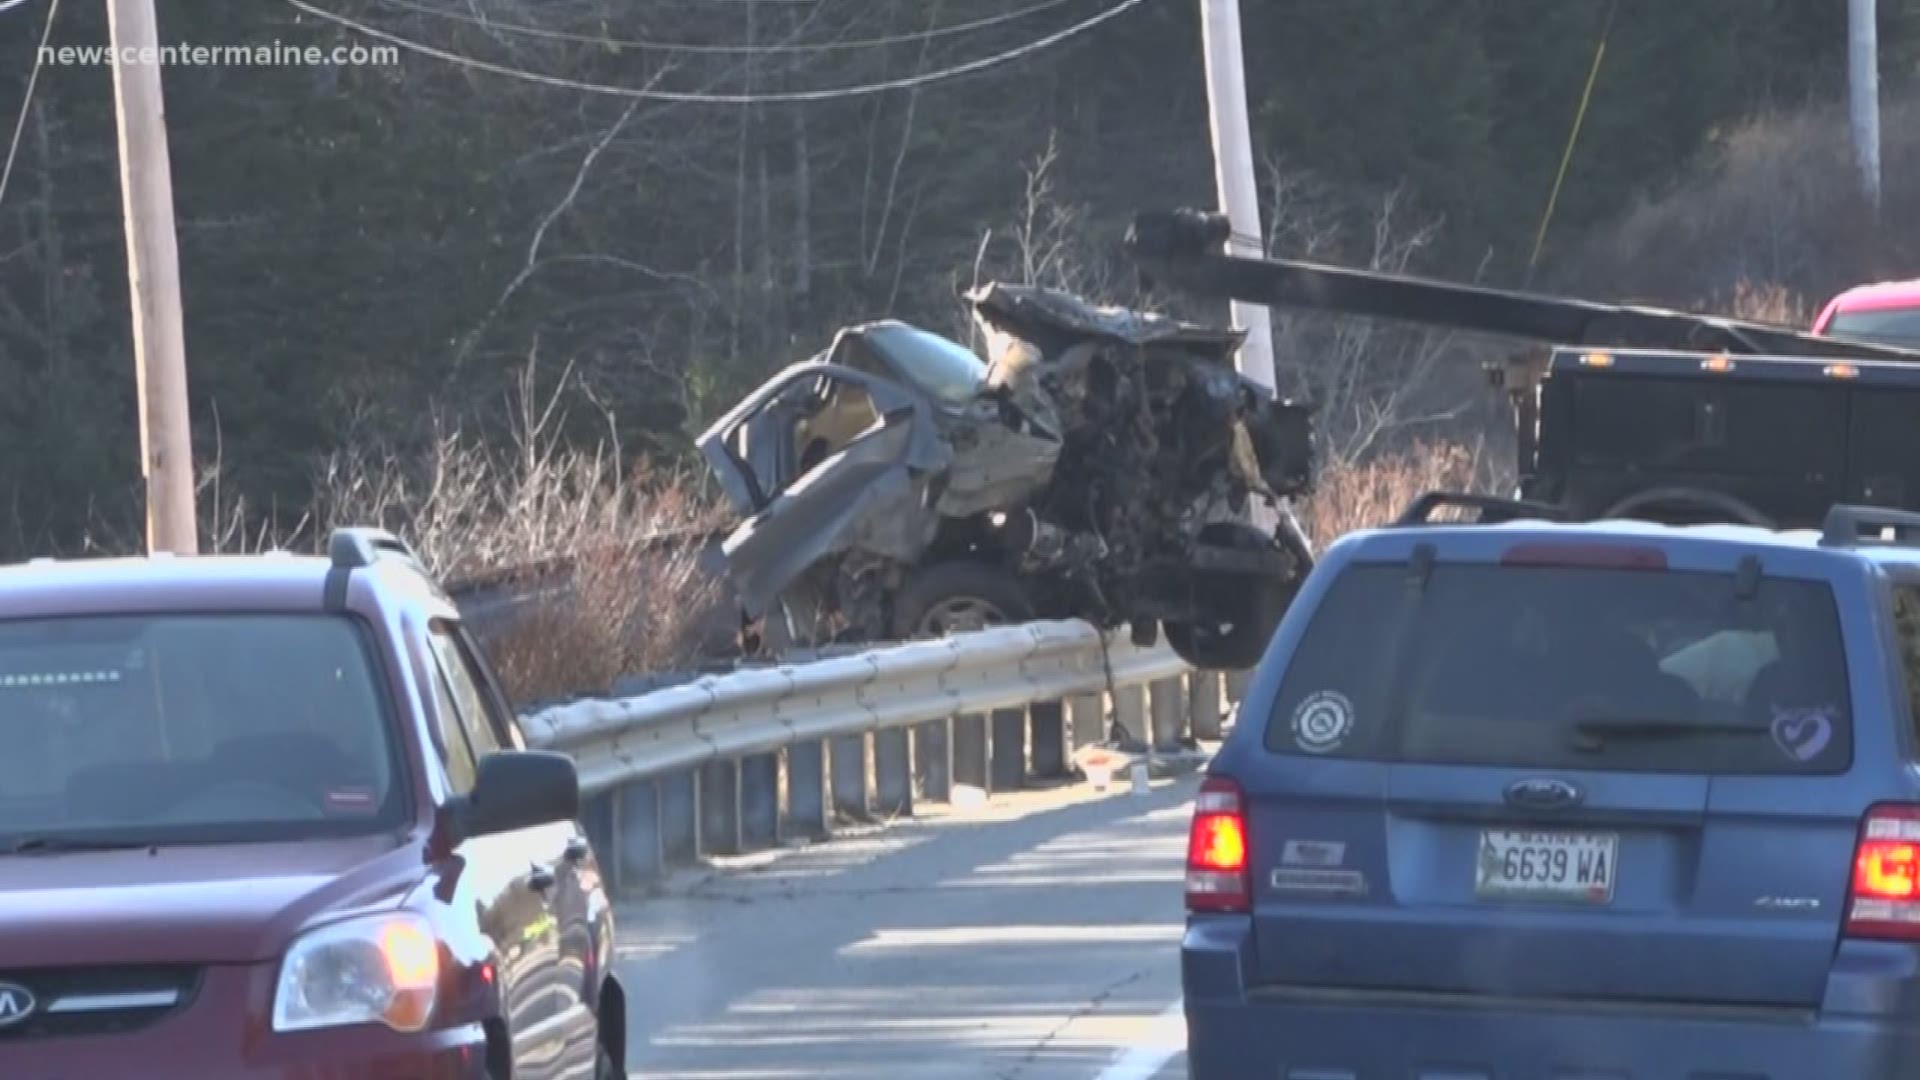 Three car crashes this Christmas season in Maine have left five people dead.